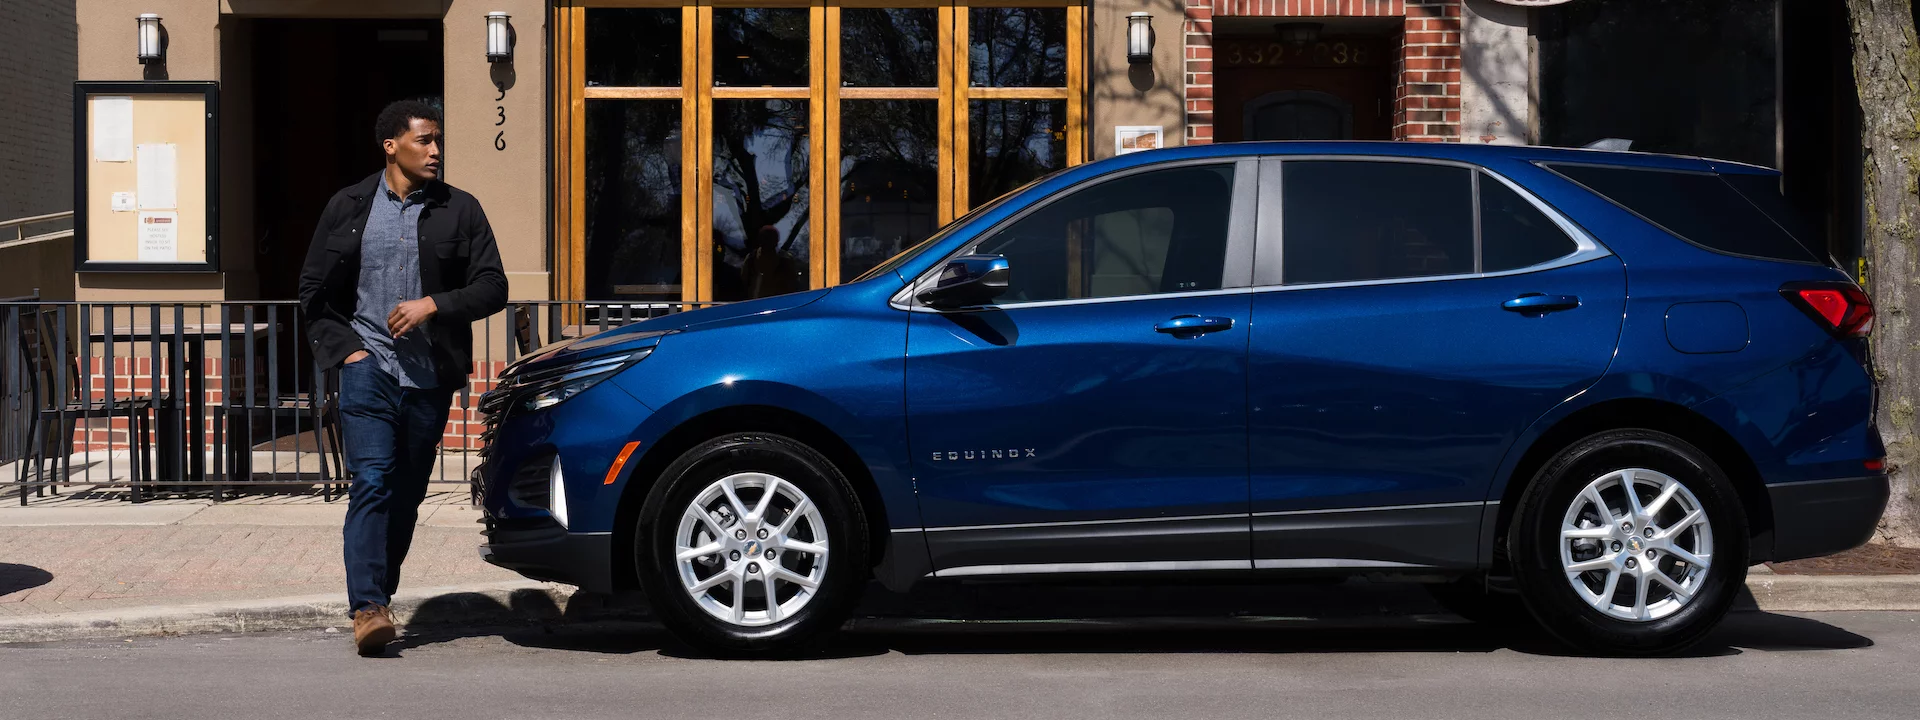 Chevy Equinox - Side View